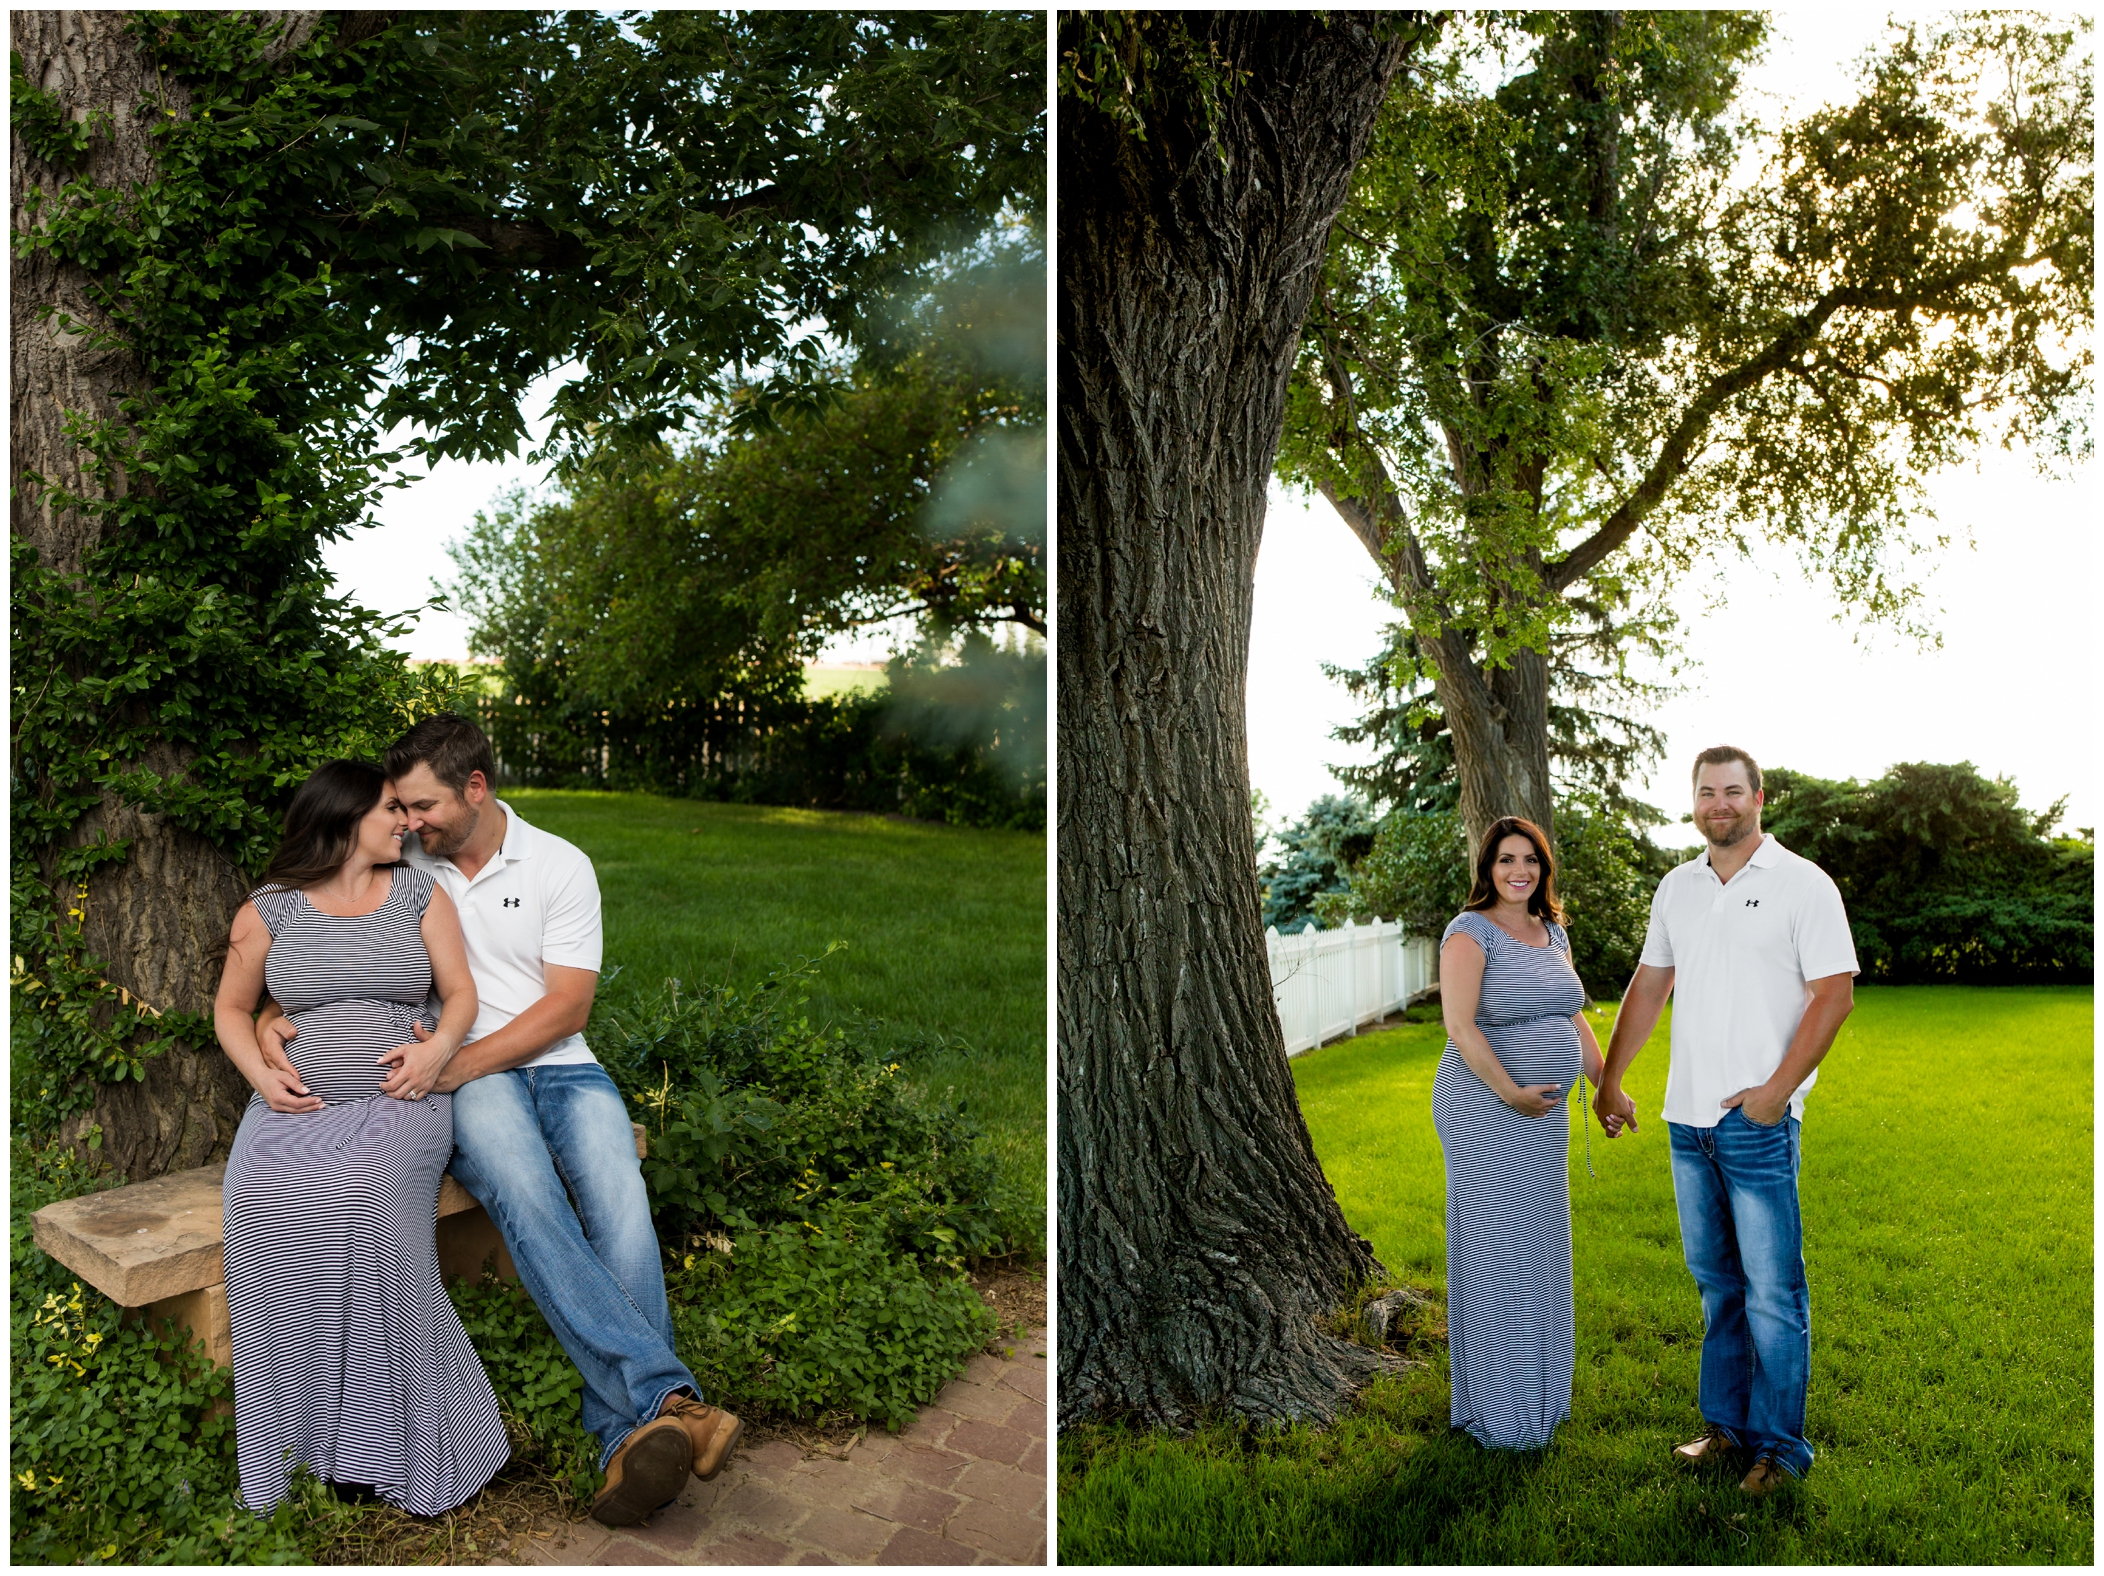 Greeley Colorado maternity photographs with lush trees in background